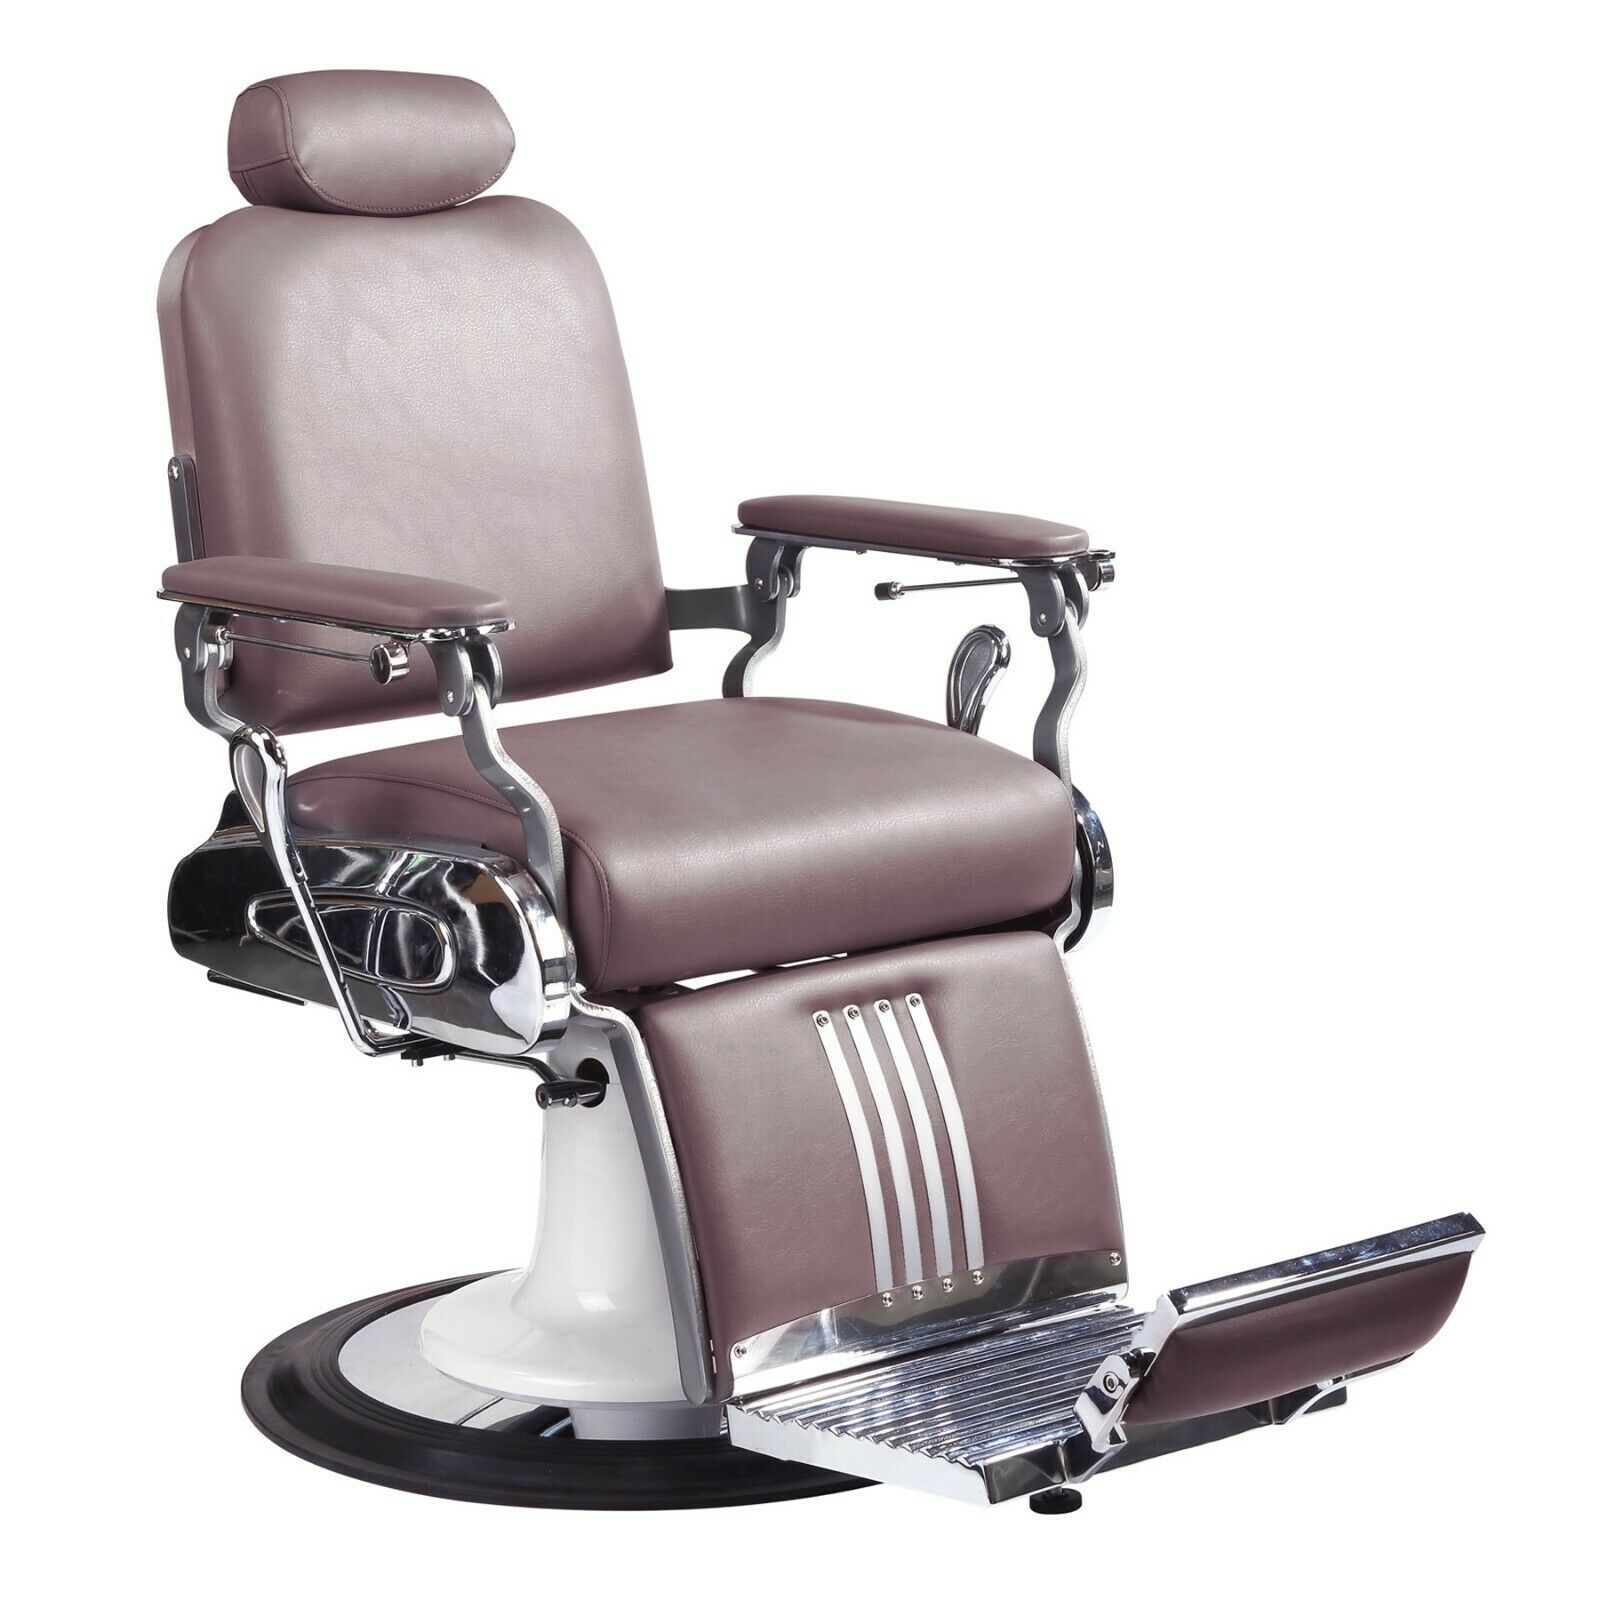 Professional High Quality Hydraulic Reclining Barber Chair Classic Vintage Brown